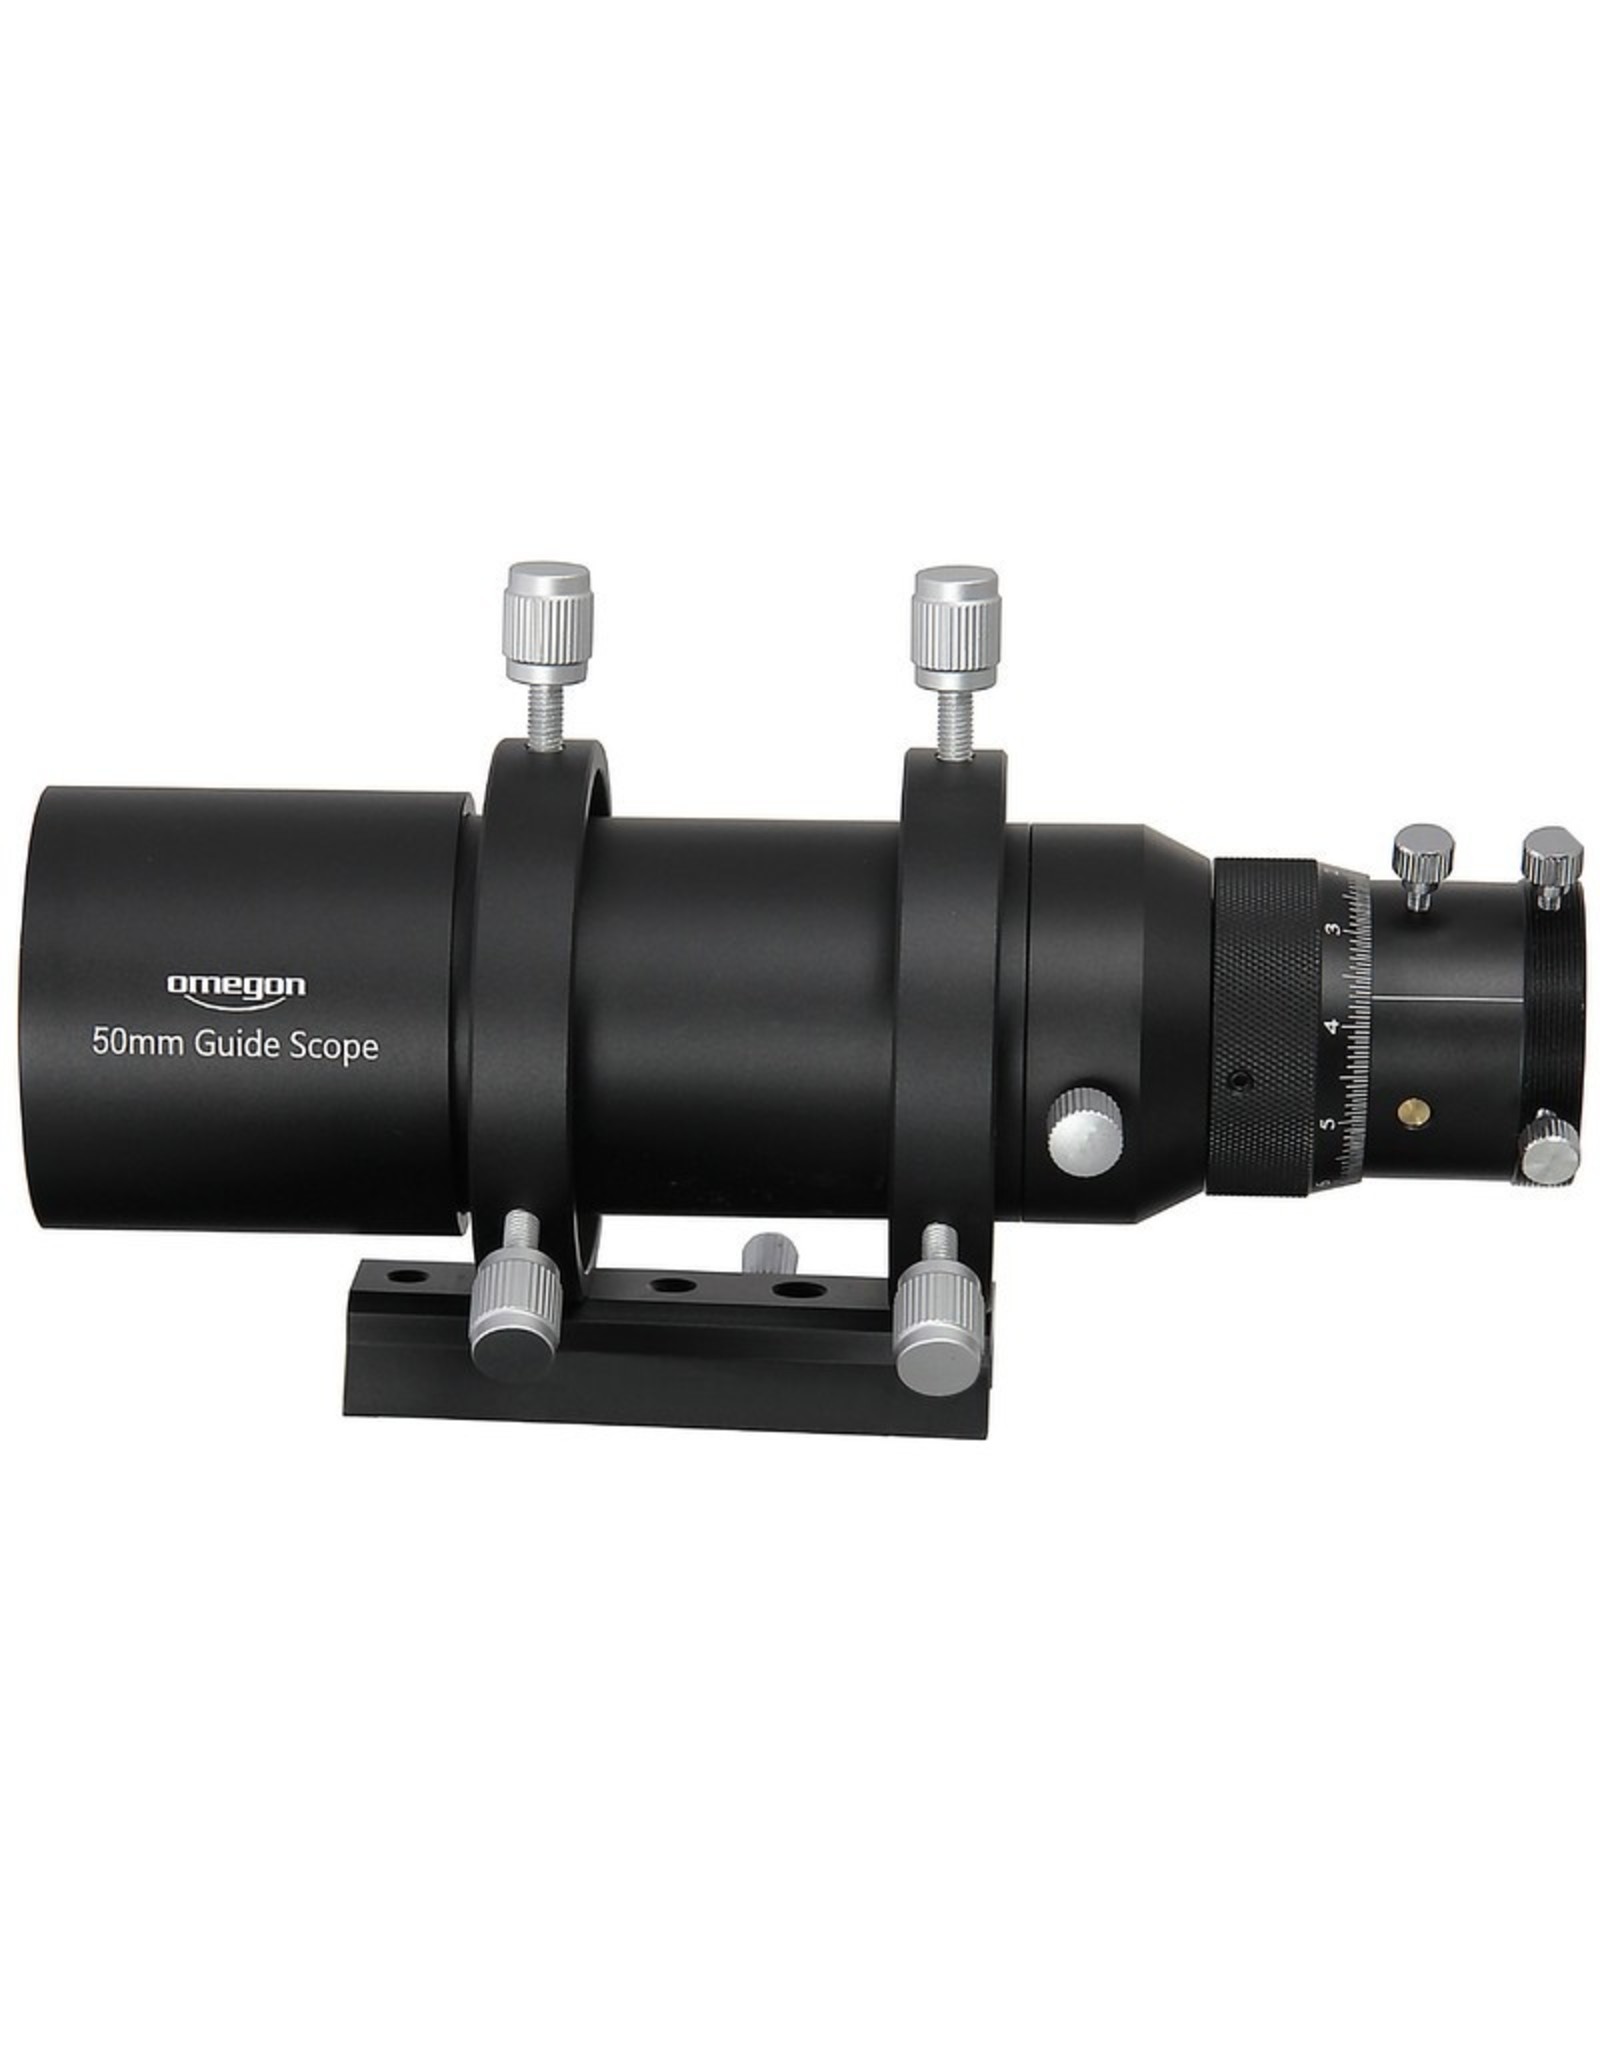 Omegon Omegon Microspeed guidescope, 50mm